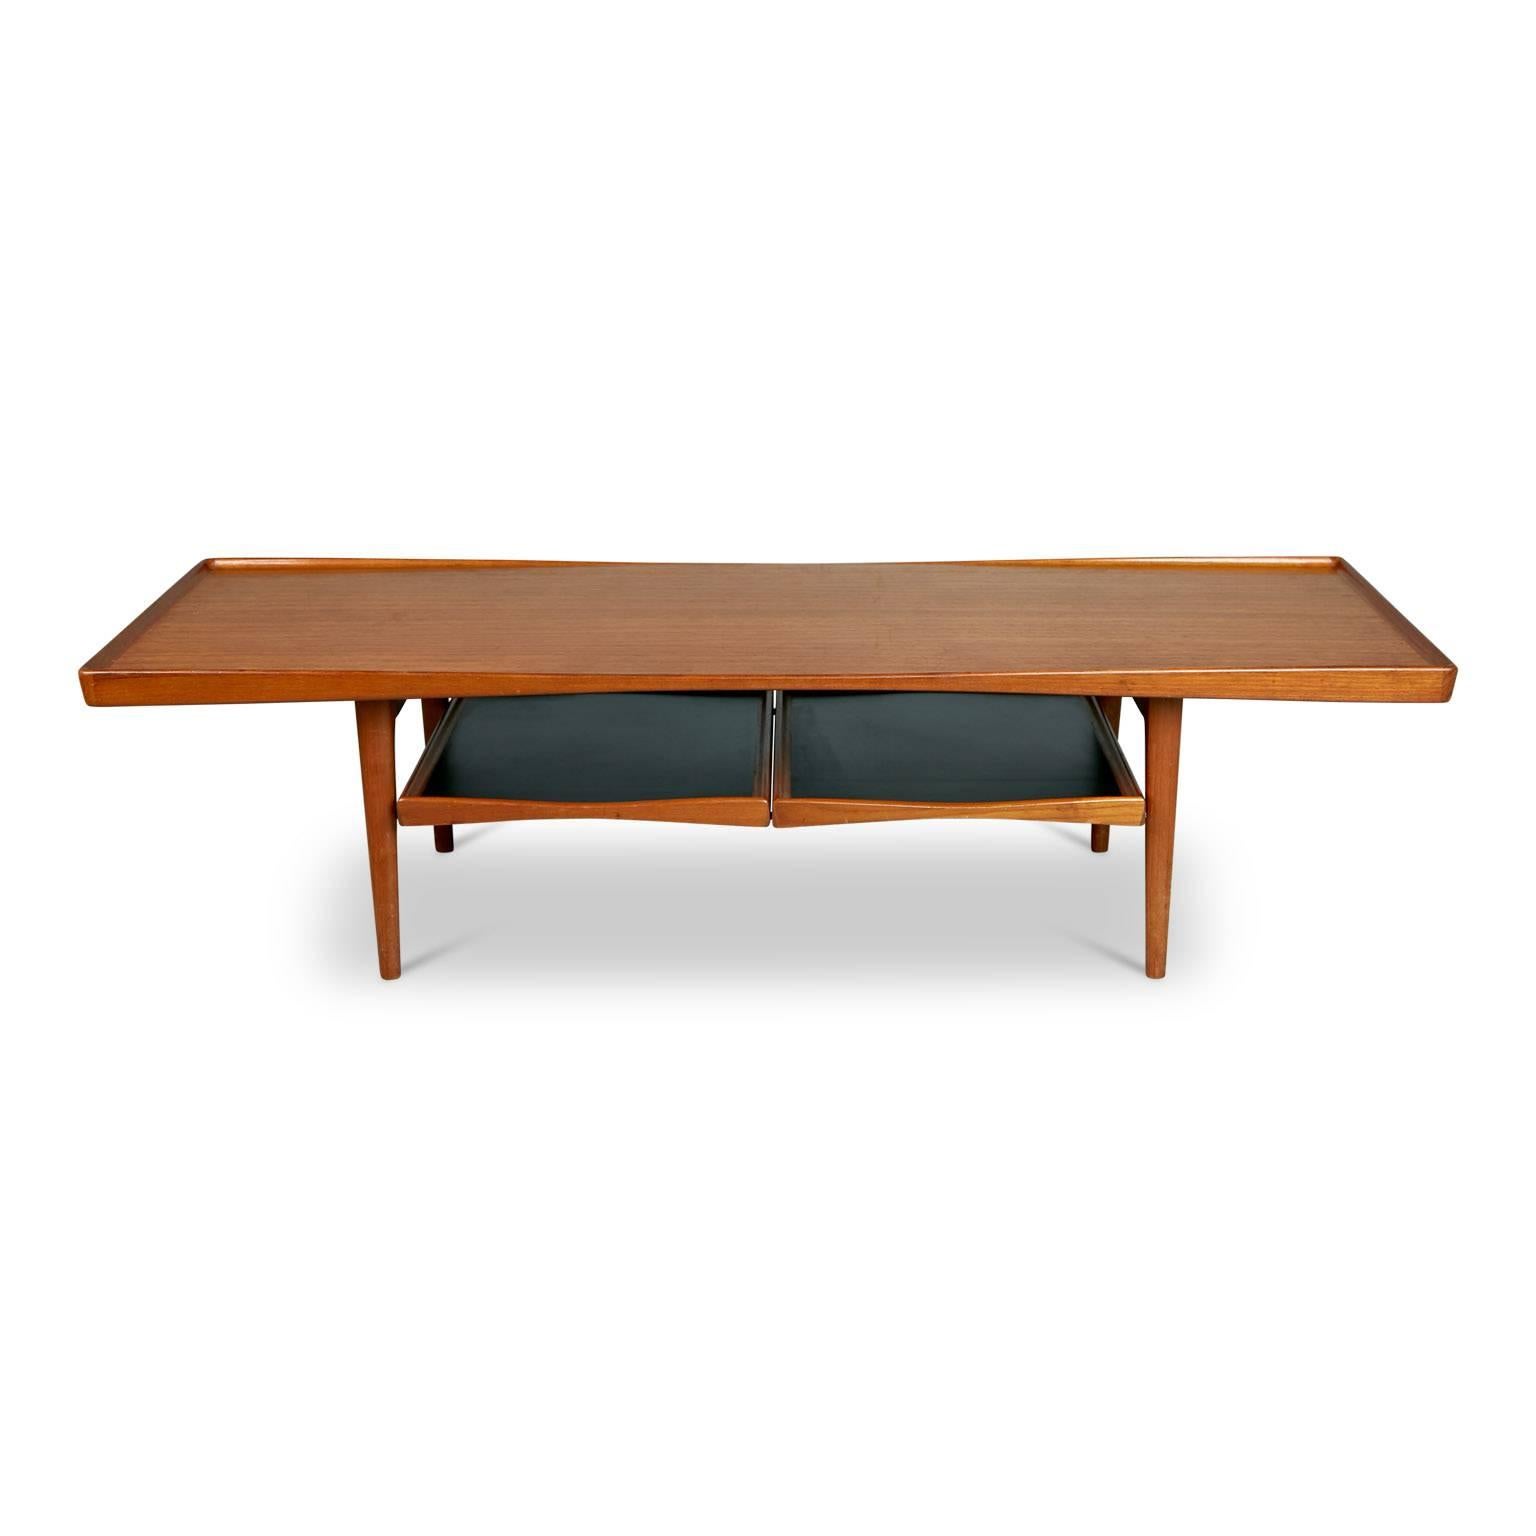 Innovative and sleek designed coffee table by Poul Jensen for Selig. This elegantly executed cocktail table is fabricated from teak and has two layers including a solid top and then an additional level underneath which holds two identical black